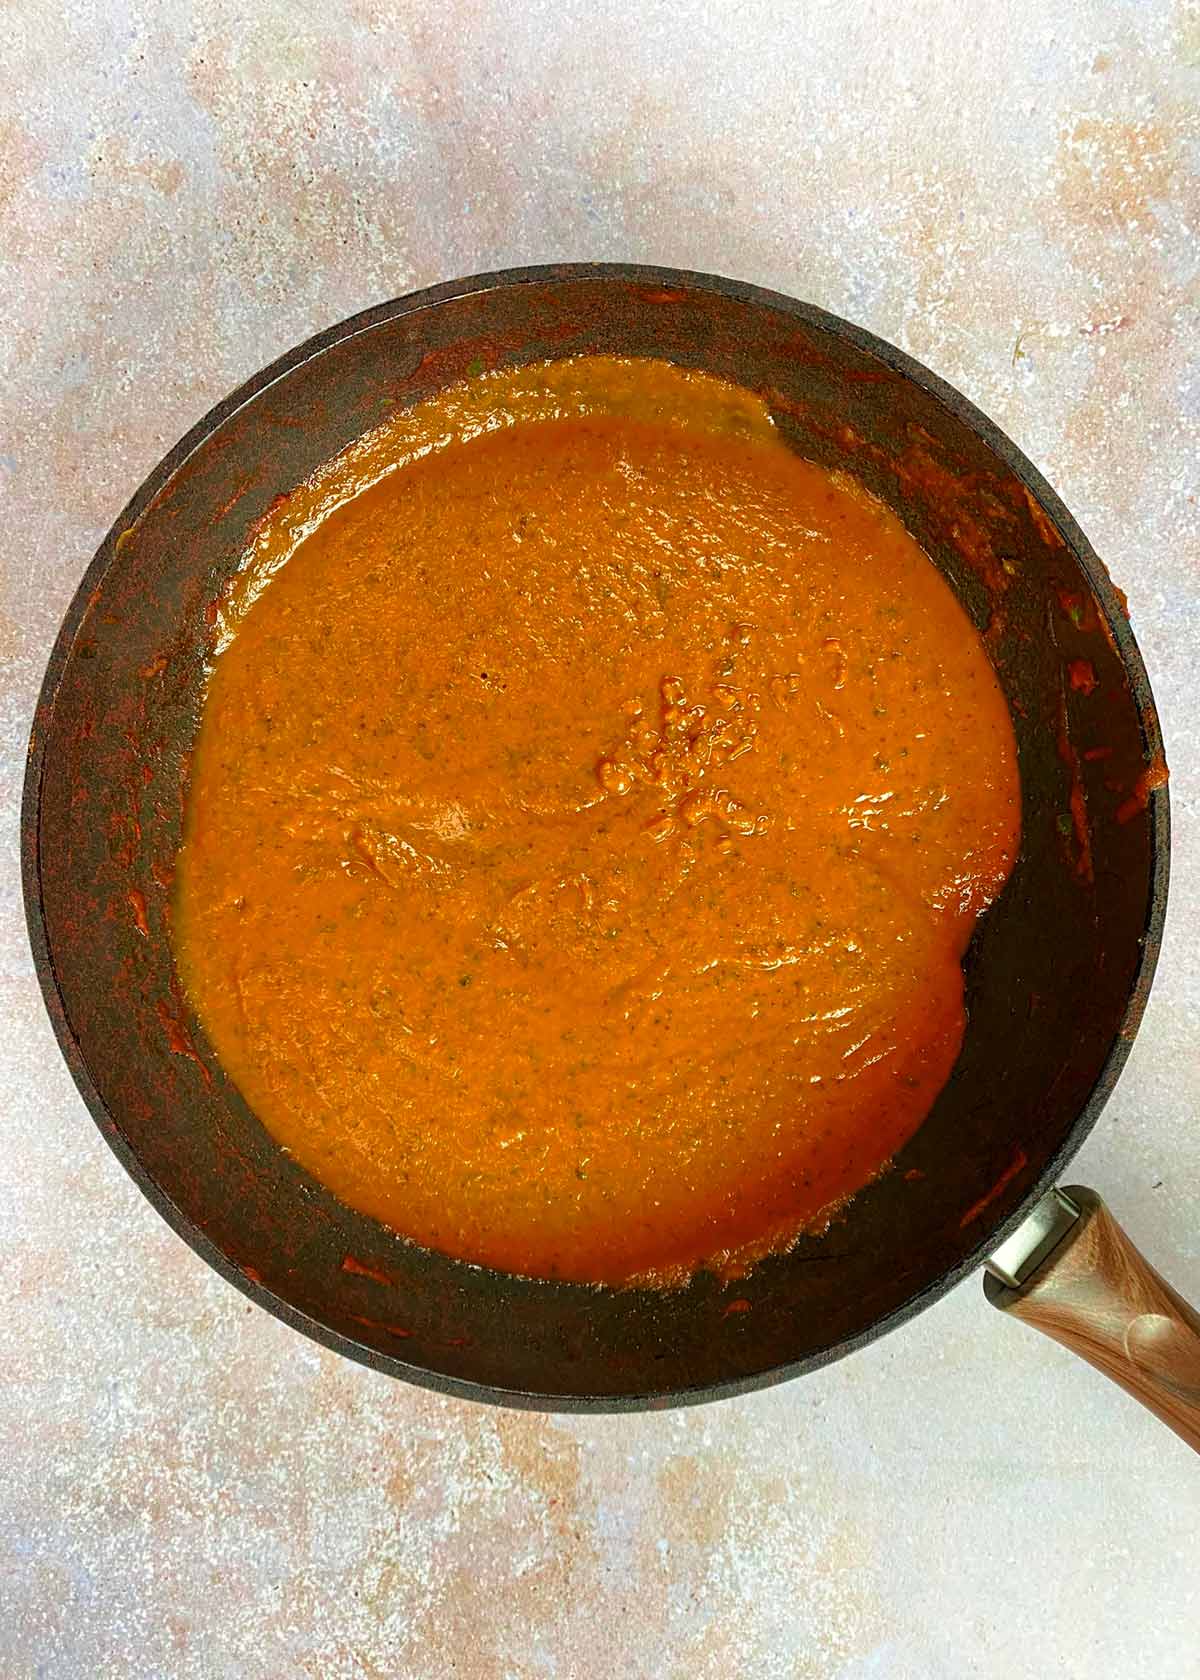 A smooth, orange coloured curry sauce in a frying pan.